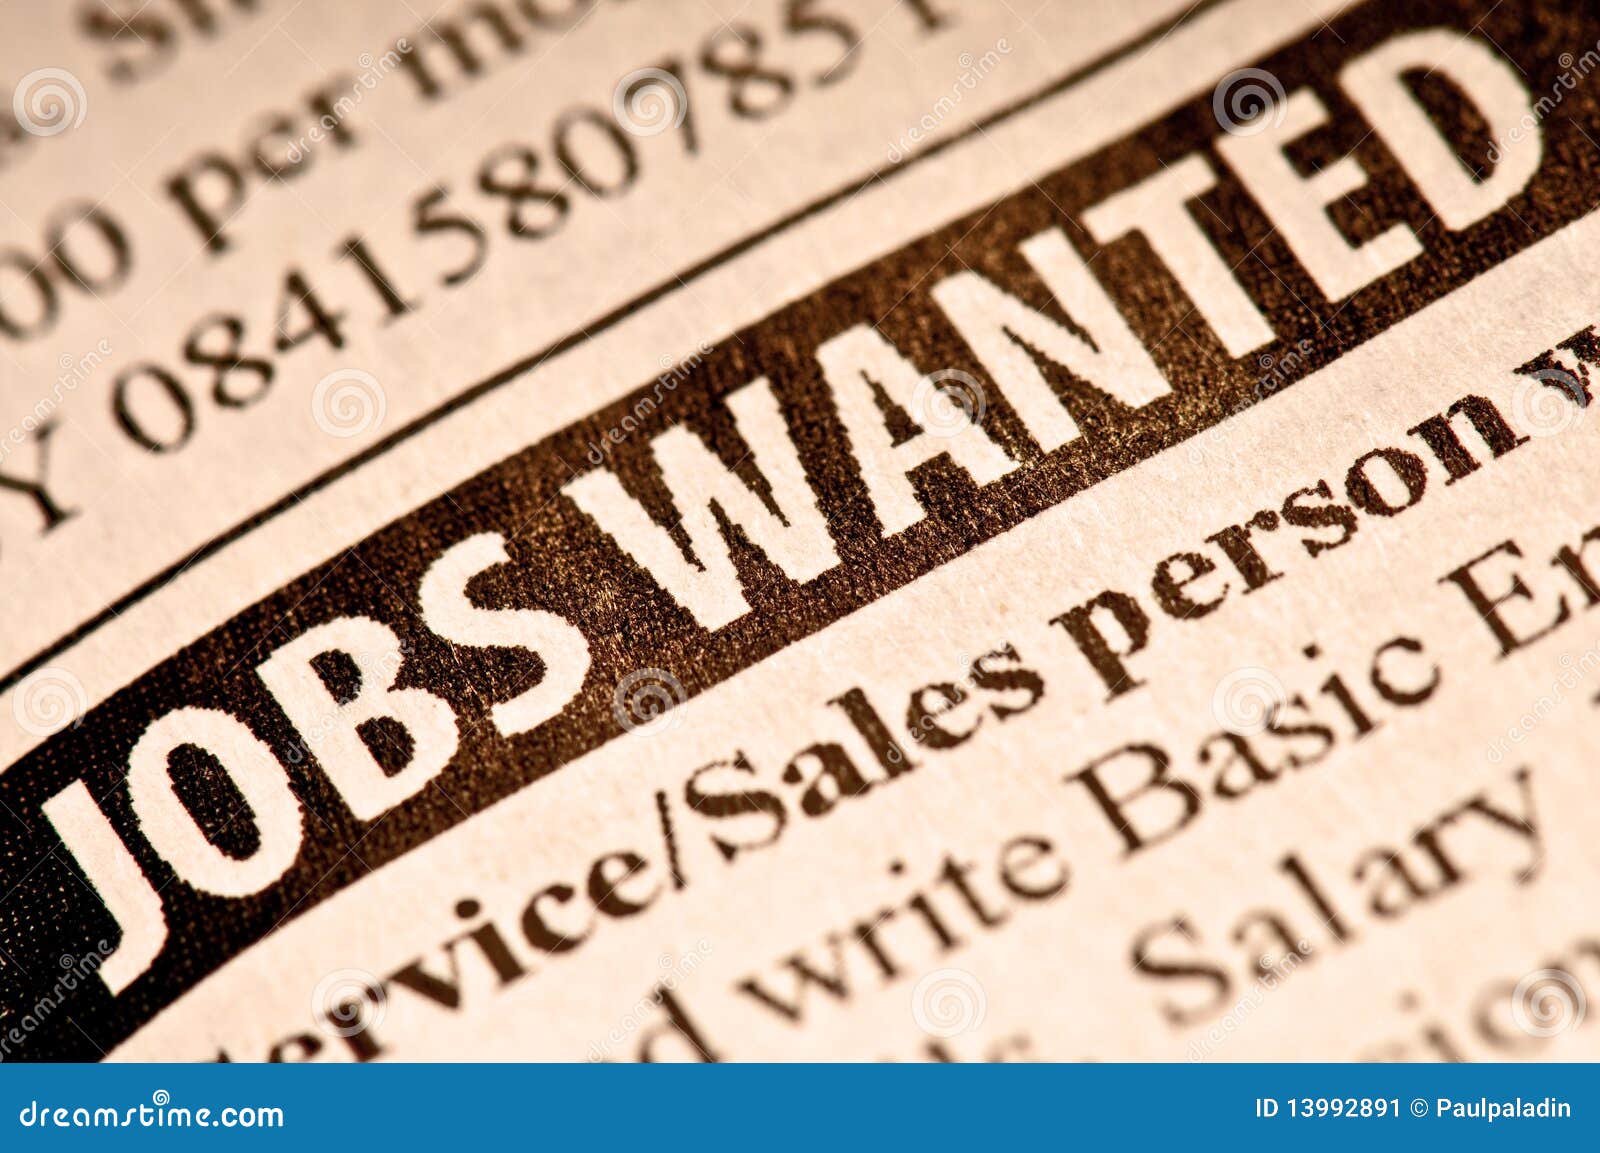 Jobs wanted stock image. Image of search, unemployment - 13992891